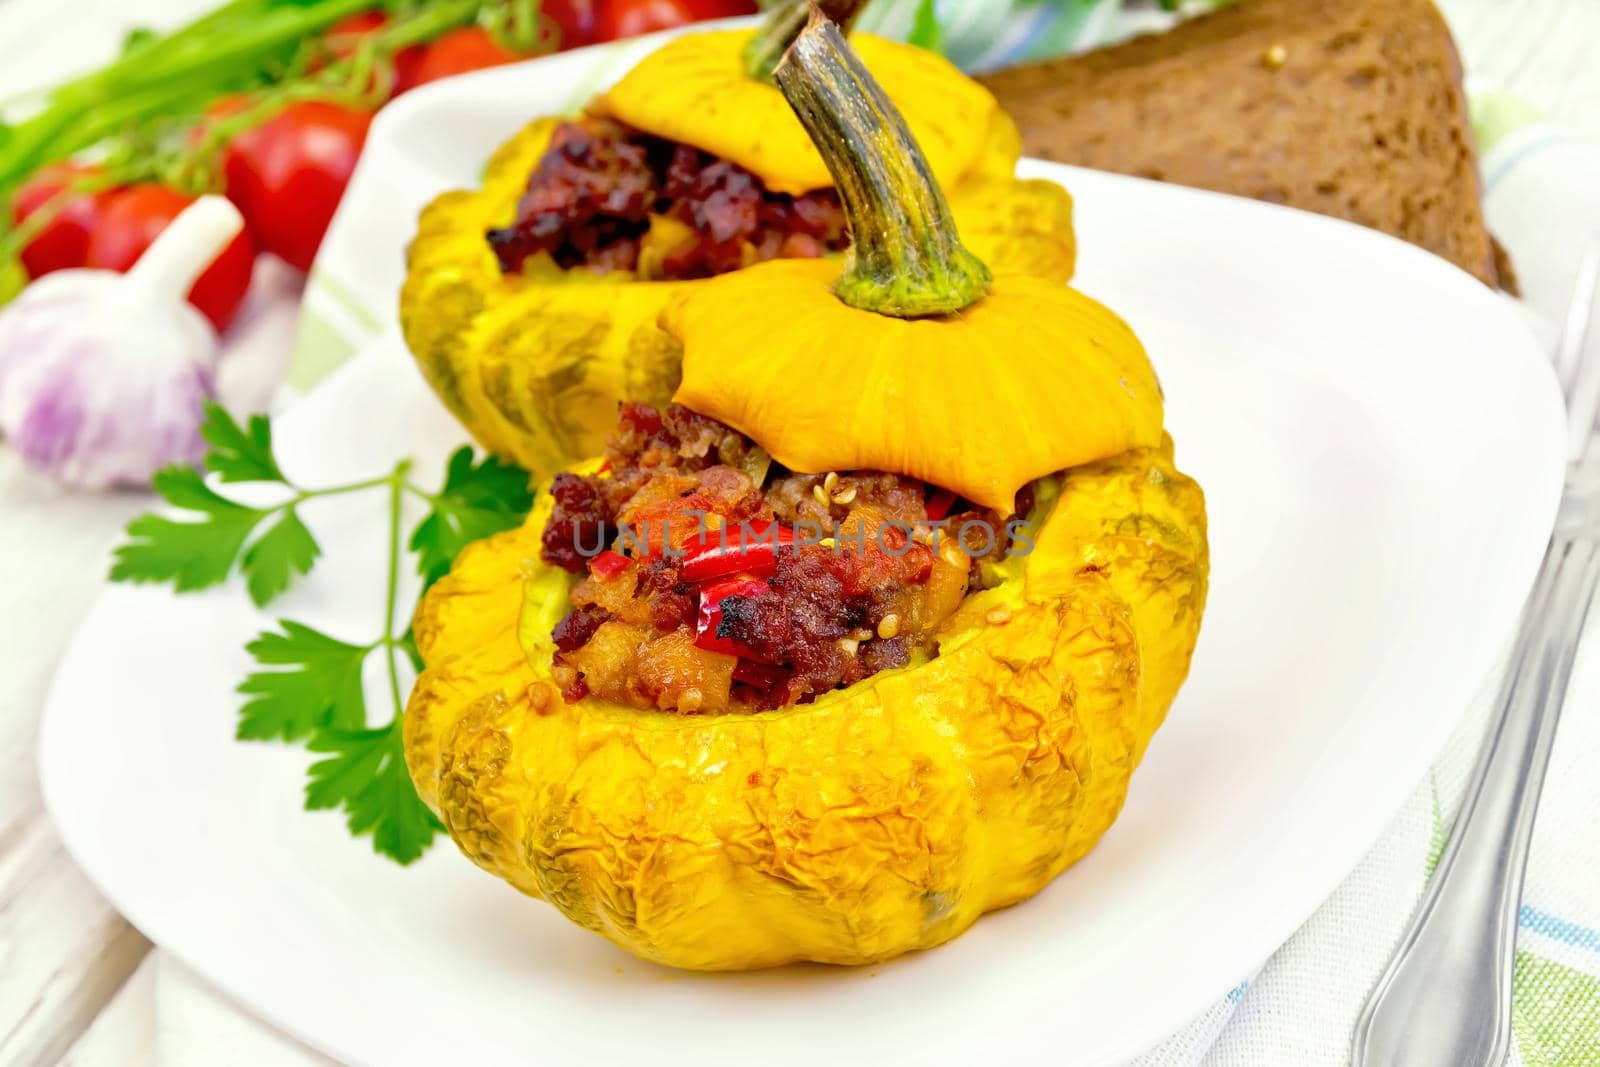 Two yellow squash stuffed with meat, tomatoes and peppers in the dish, bread, garlic, parsley and a napkin on a wooden boards background